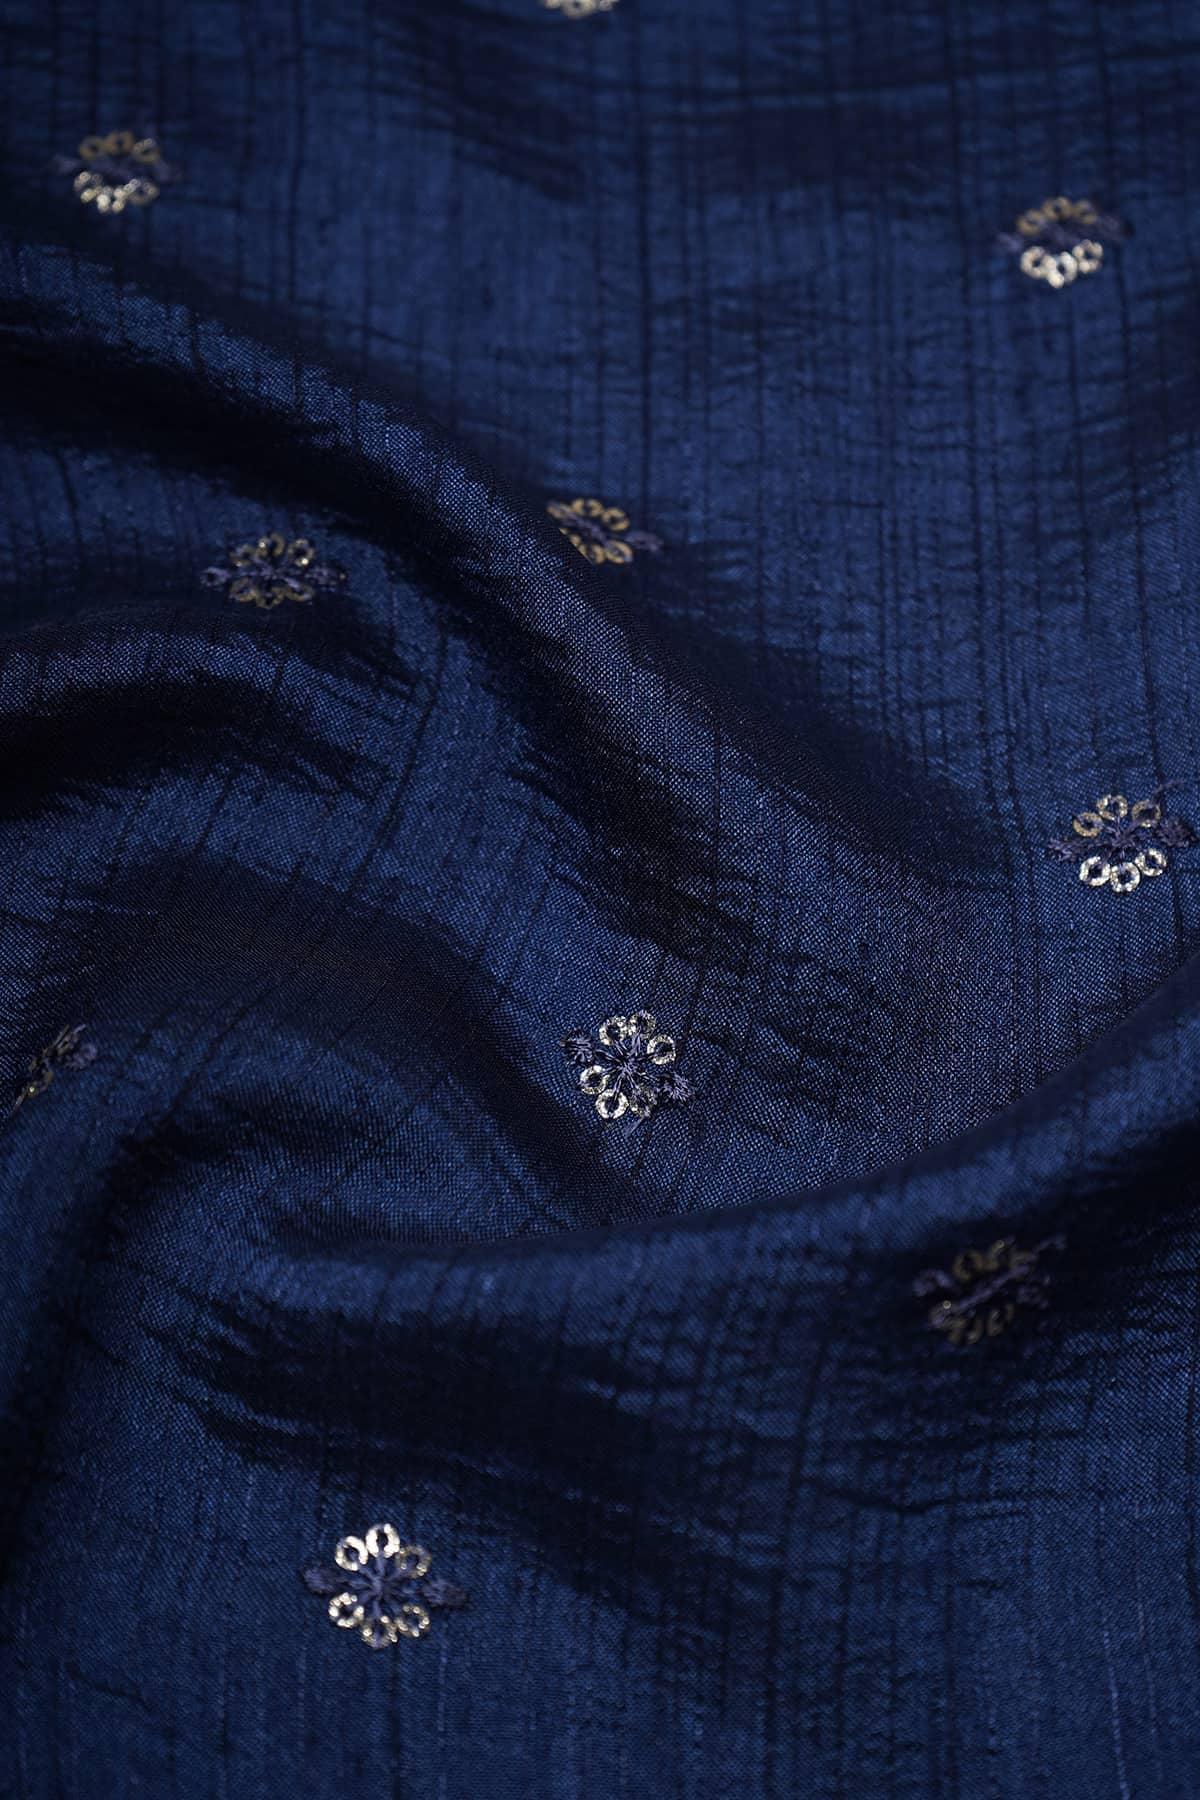 Silver Floral Sequin Motif Embroidered on Navy Blue Color Alina Silk - saraaha.com - Accessories, Alina silk, Embroidery, Festive, Kurtas, Kurtis, SILK, Skirts, Suits, Tops Dresses, Trimmings